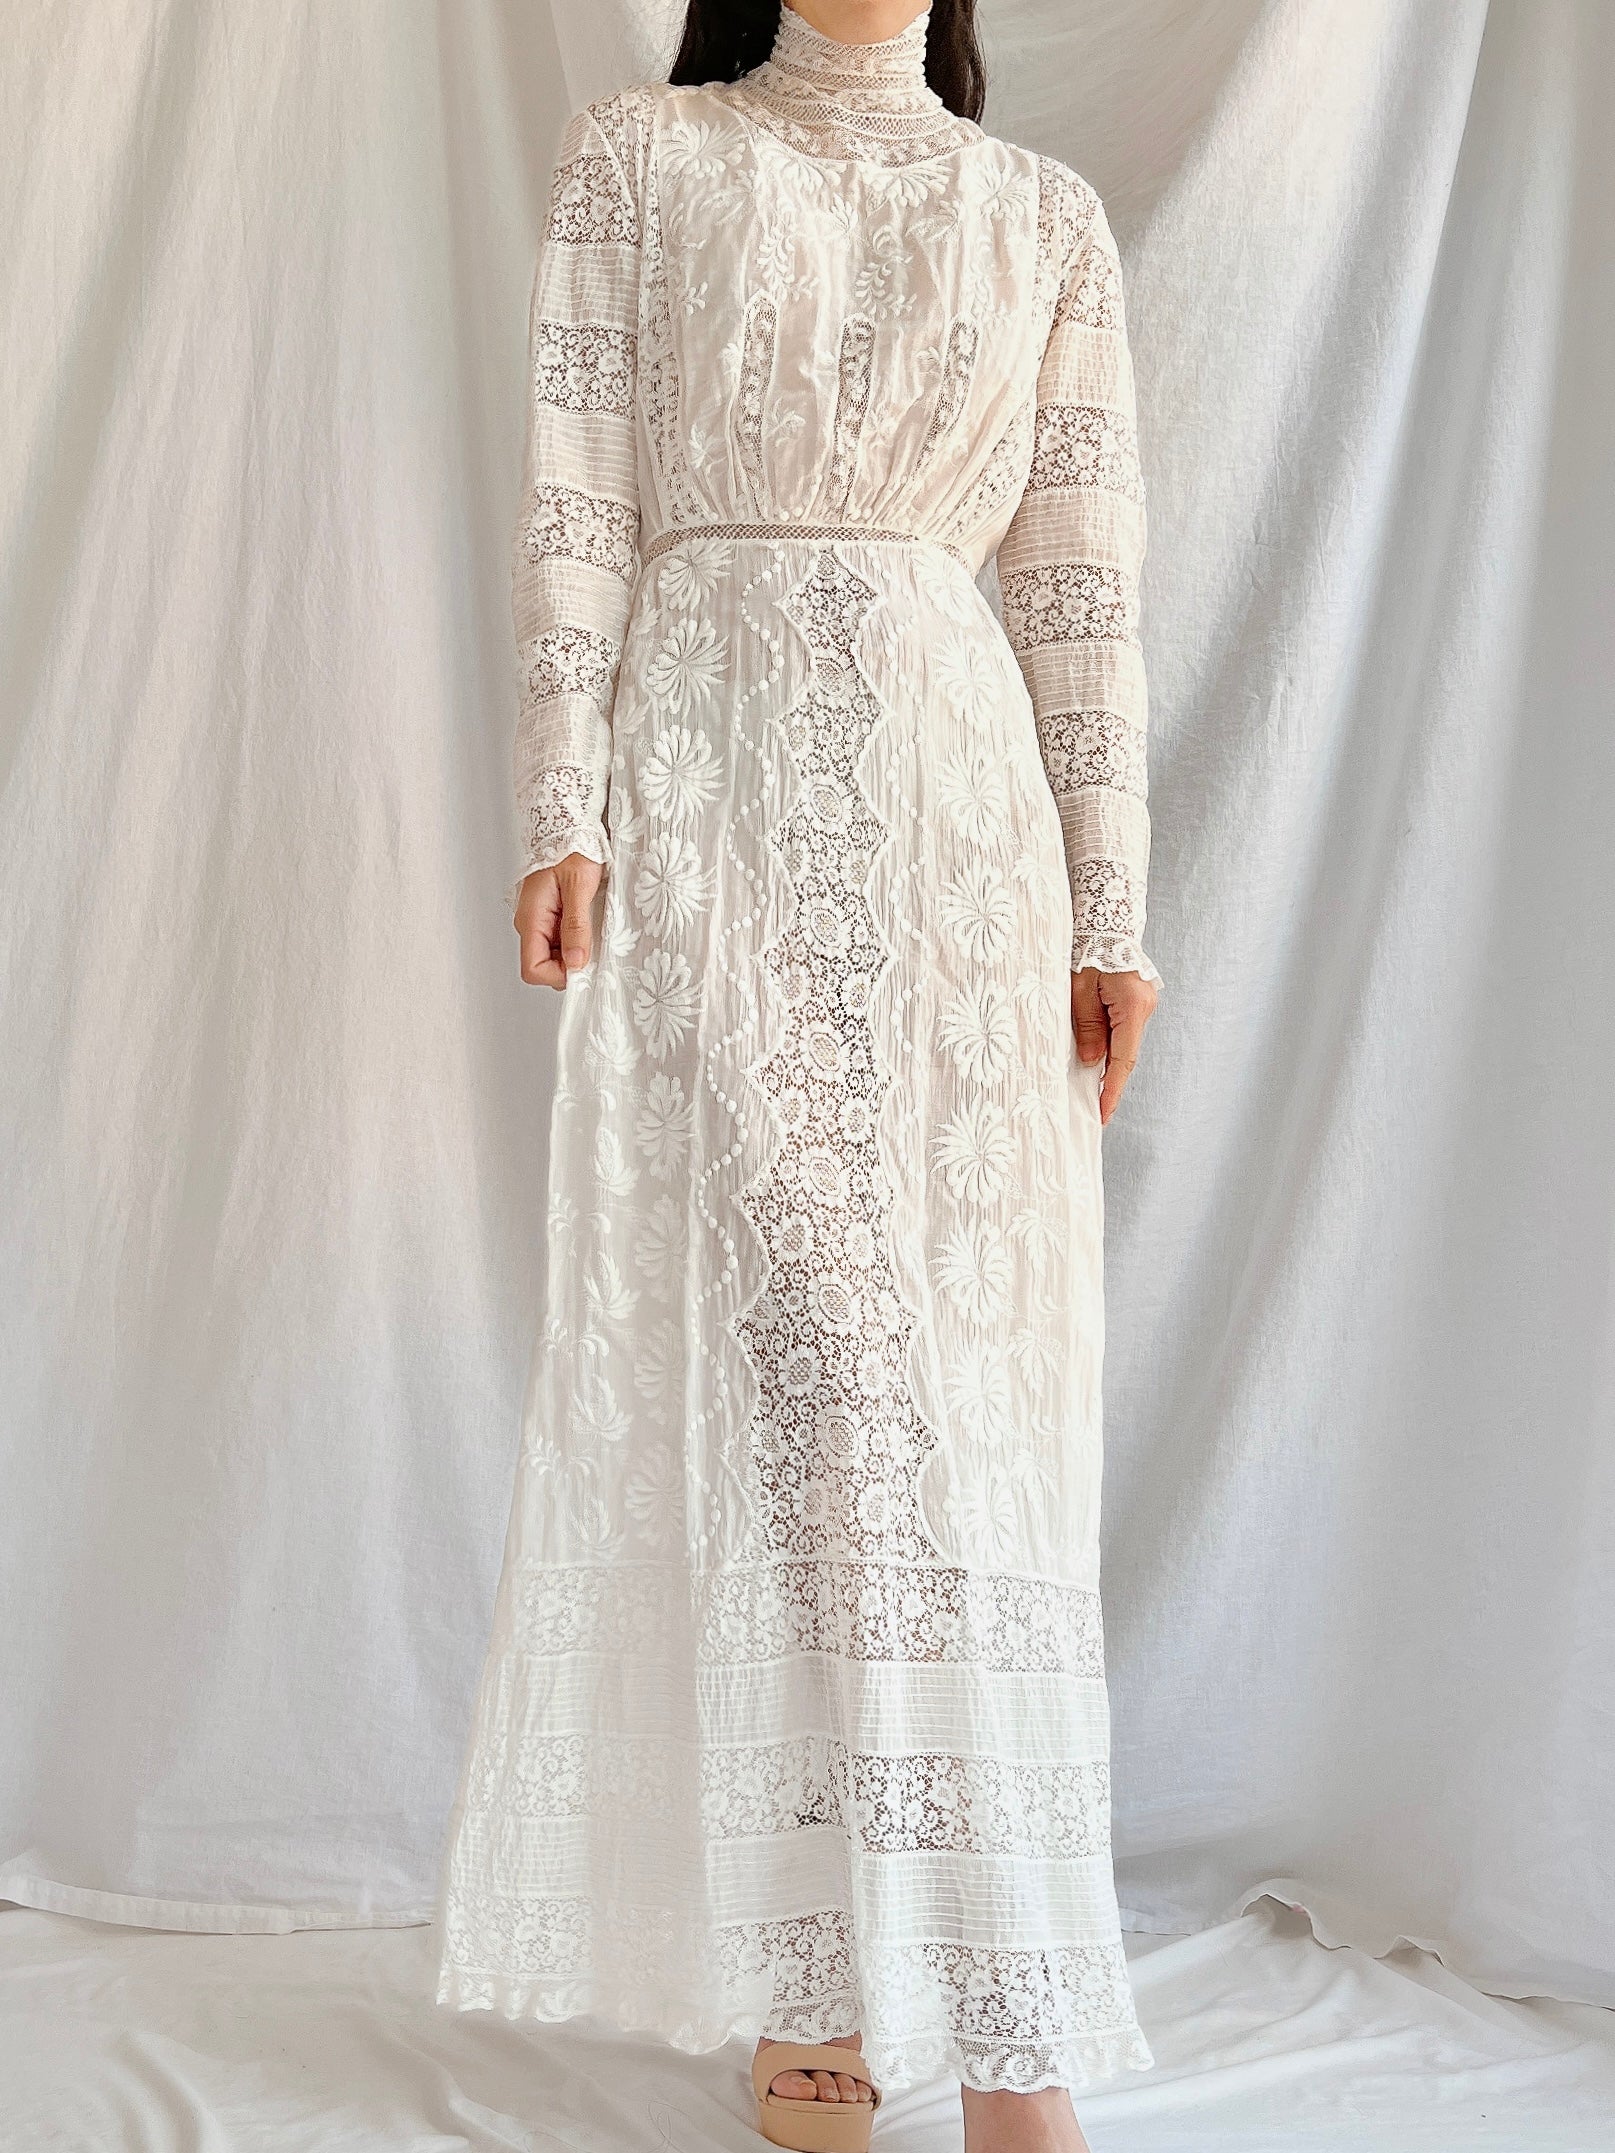 Antique Embroidered Lace Dress - XS